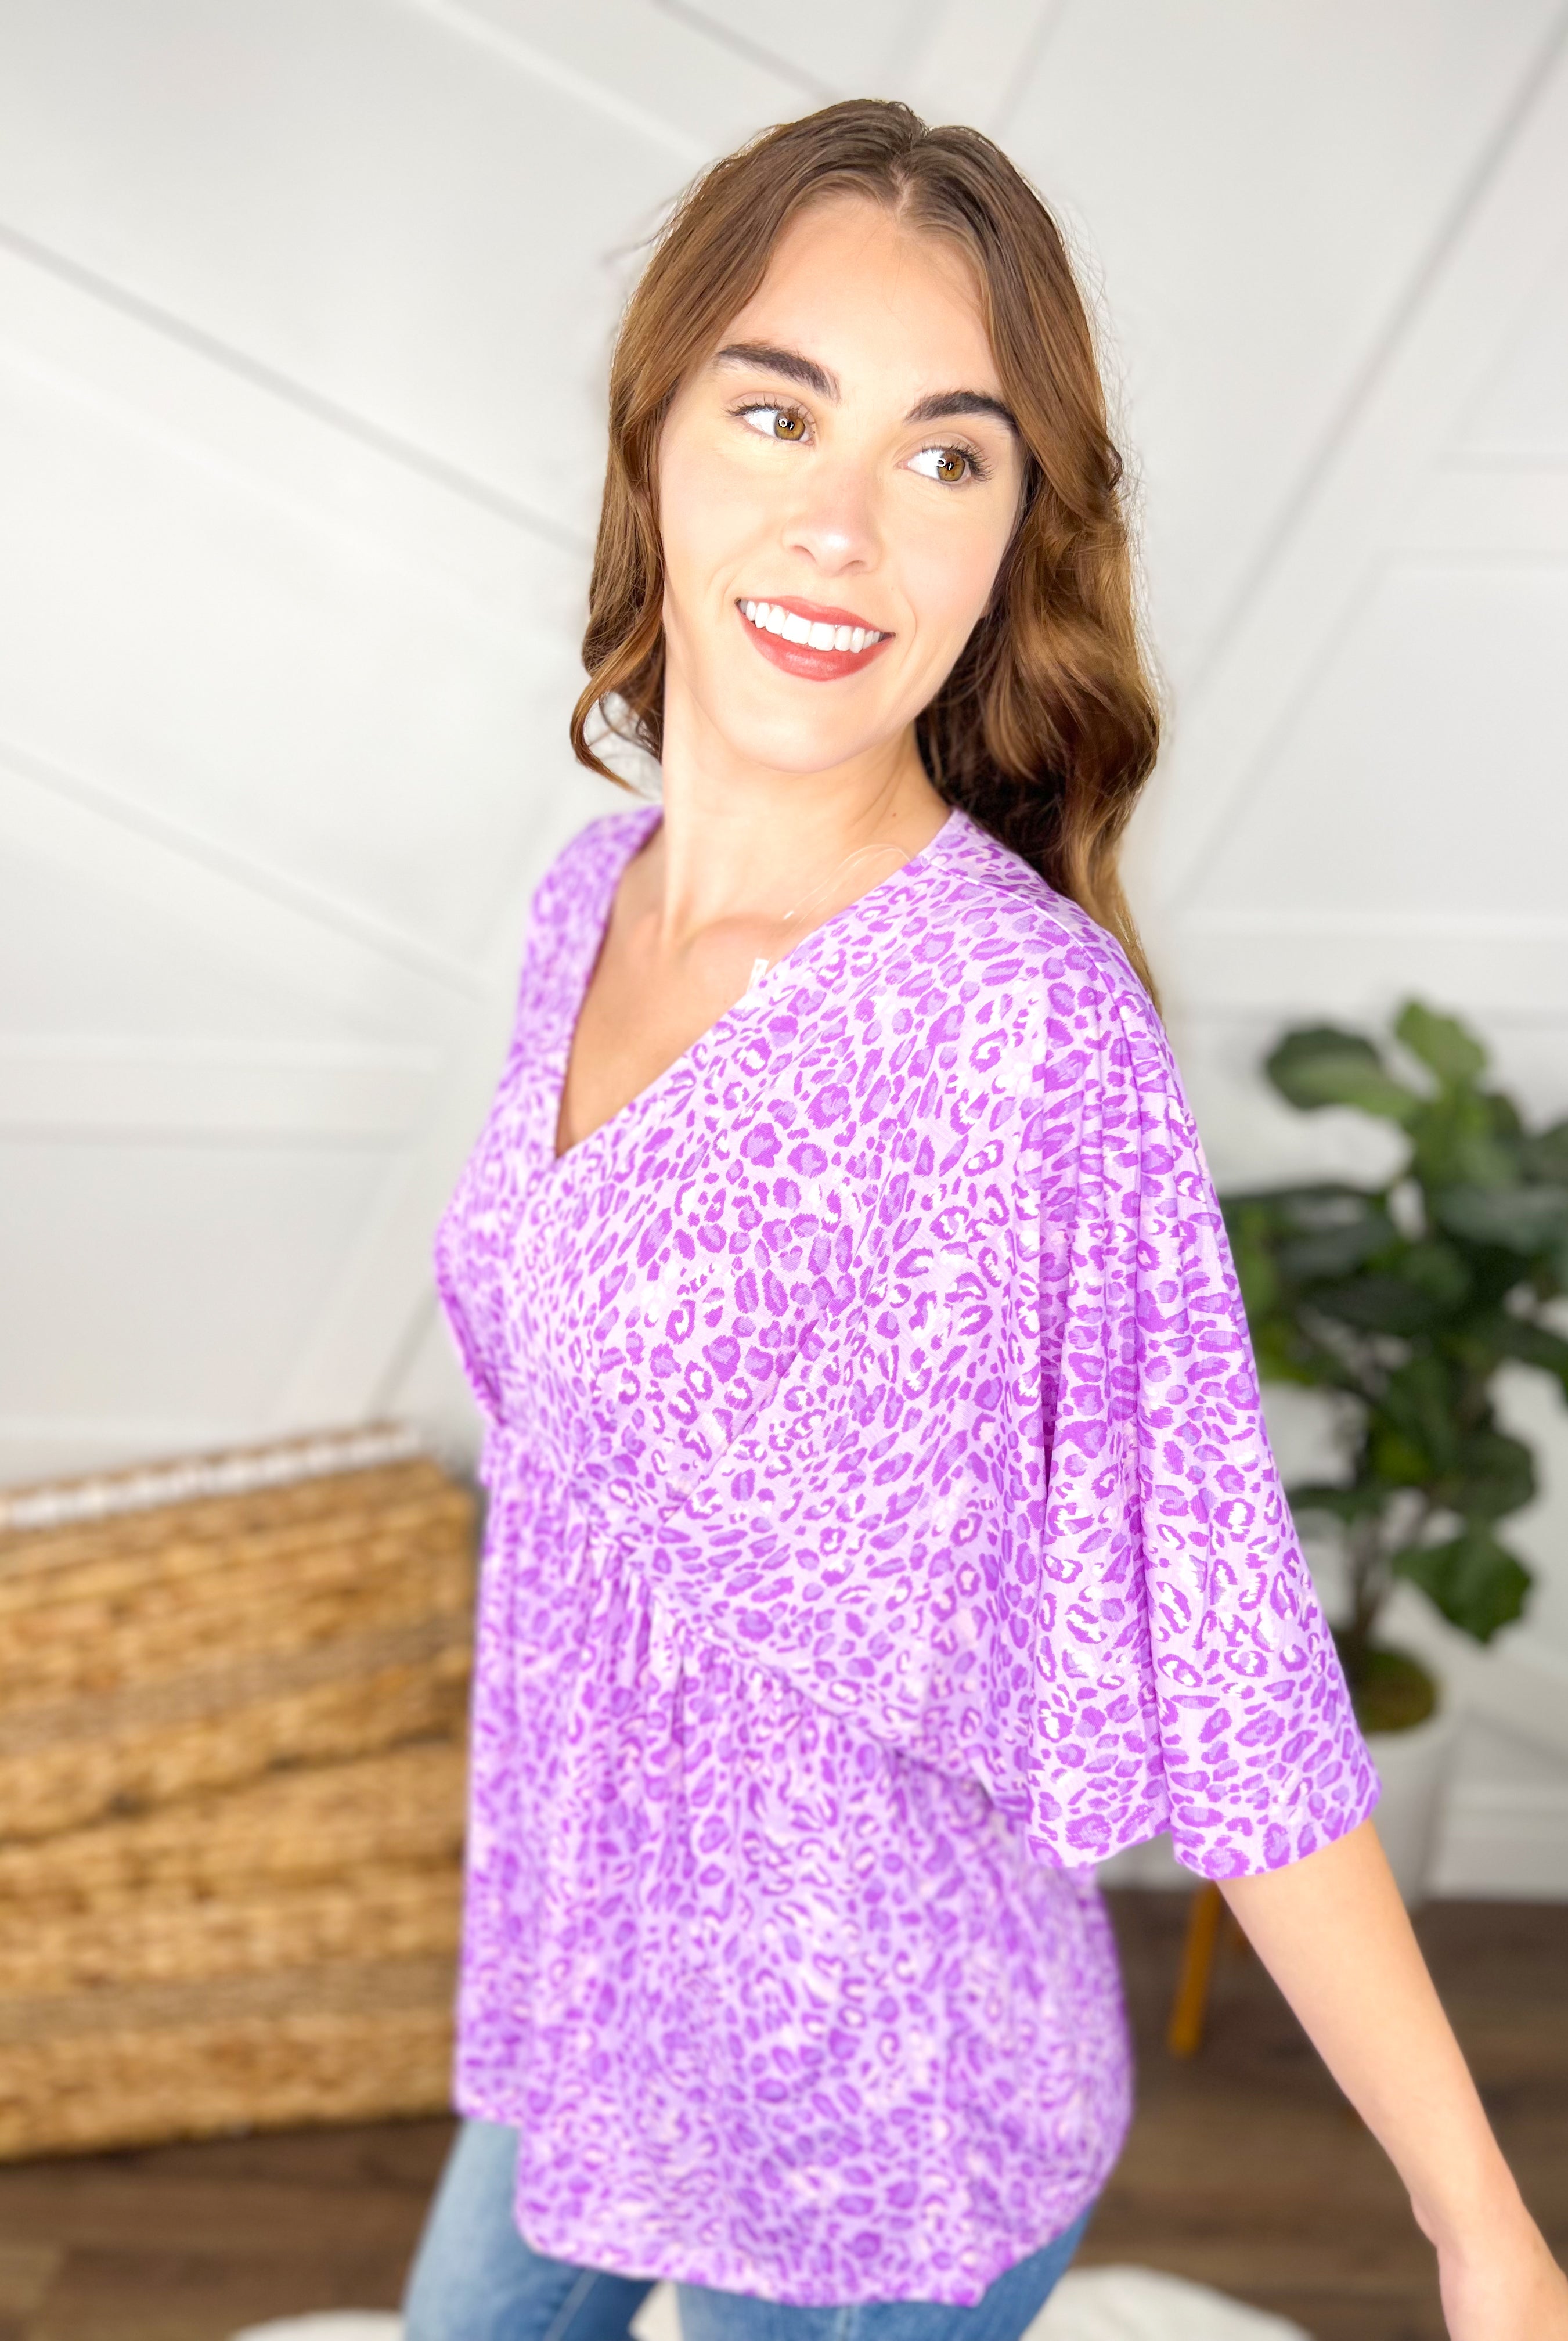 Leaping Leopards Top-110 Short Sleeve Top-DEAR SCARLETT-Heathered Boho Boutique, Women's Fashion and Accessories in Palmetto, FL